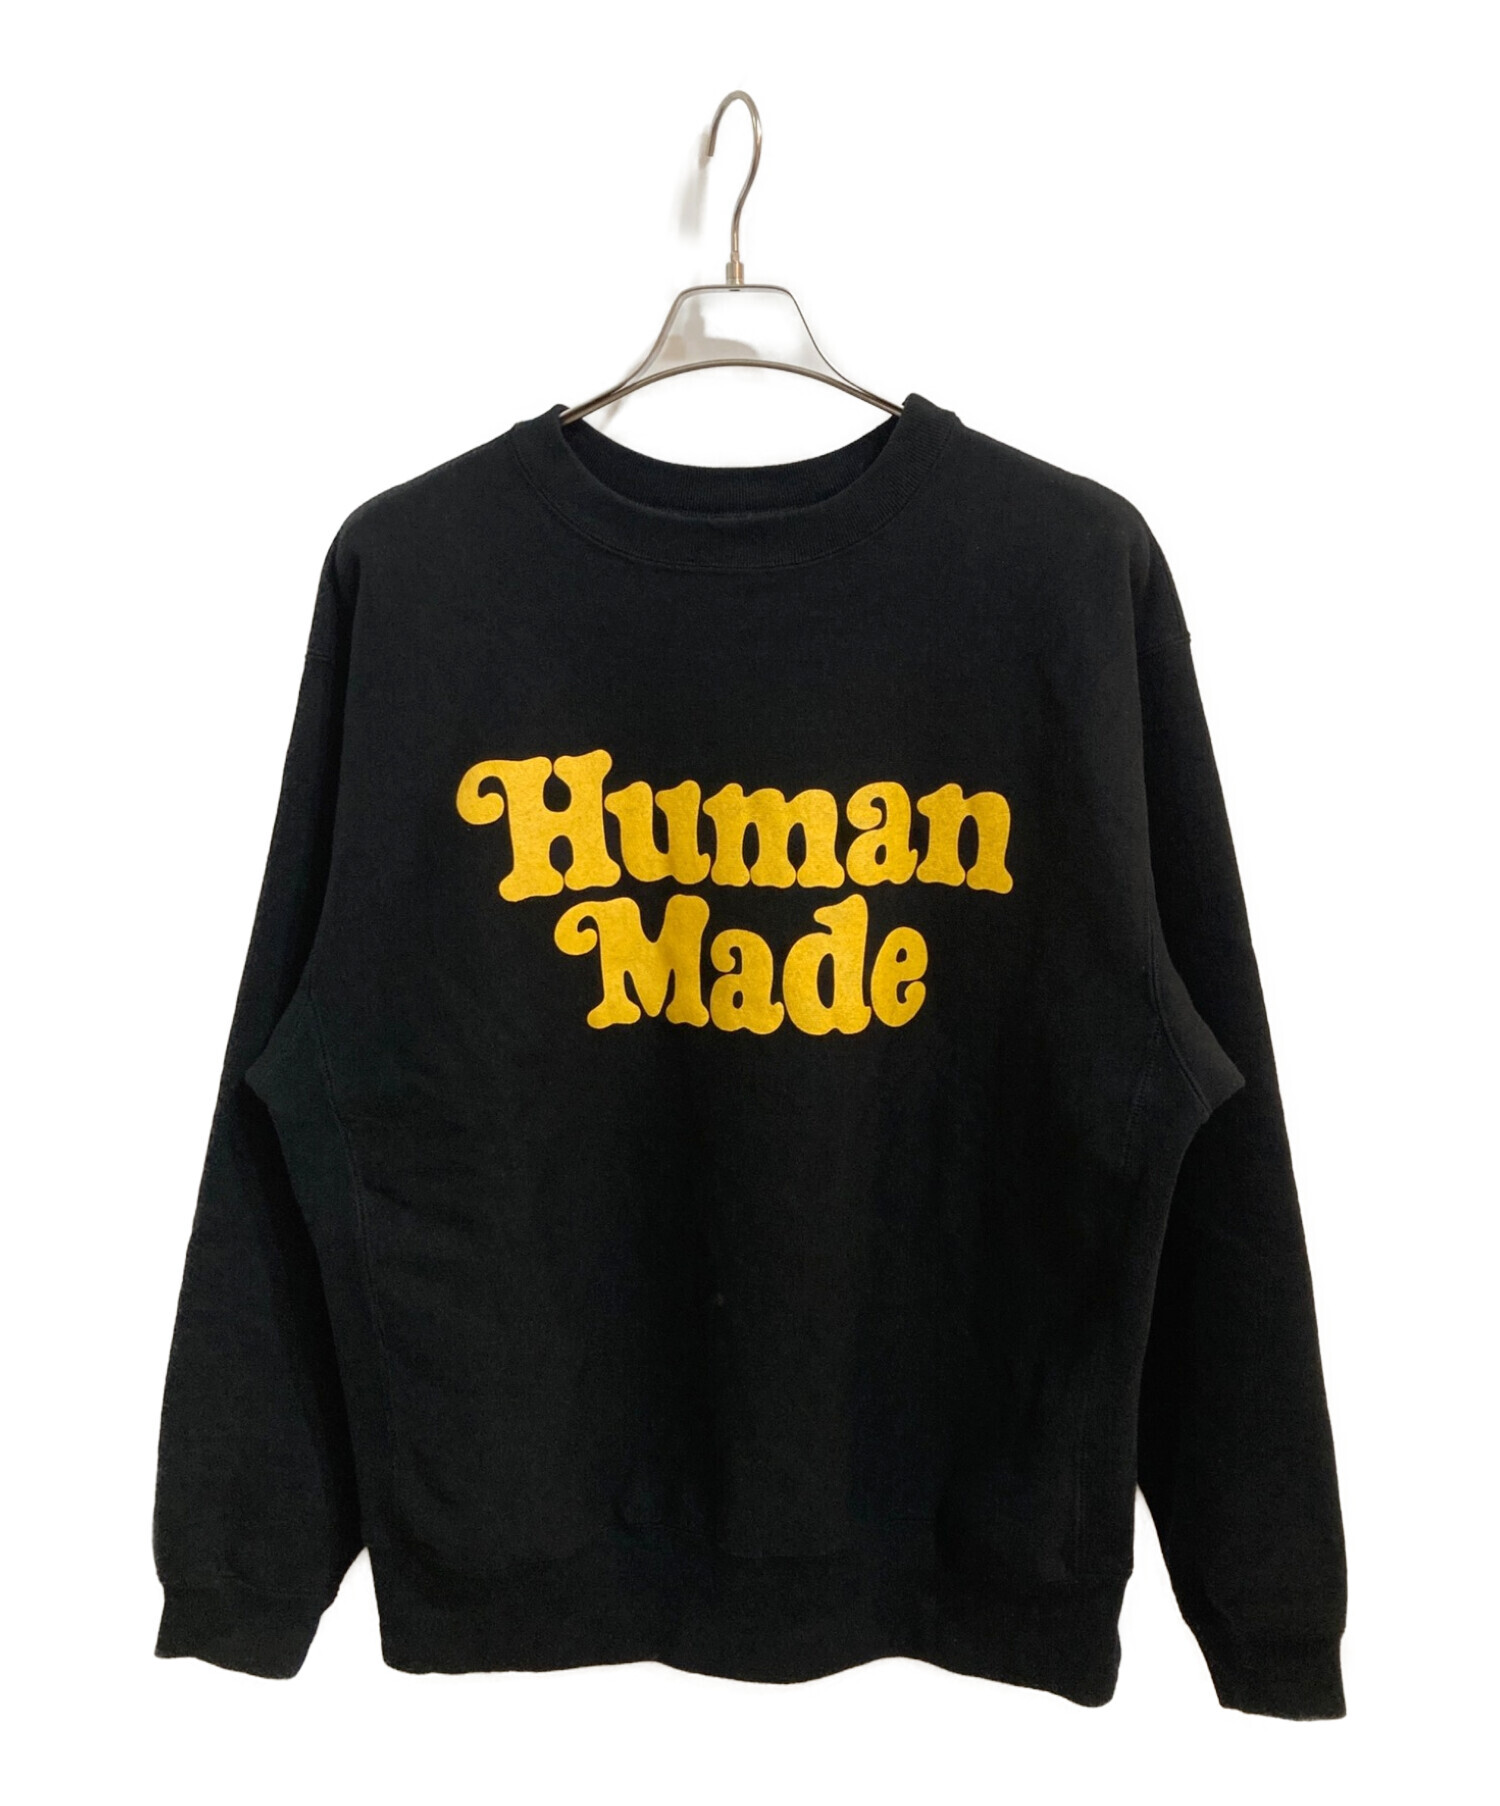 human made×verdy スウェットXL黒 | www.innoveering.net